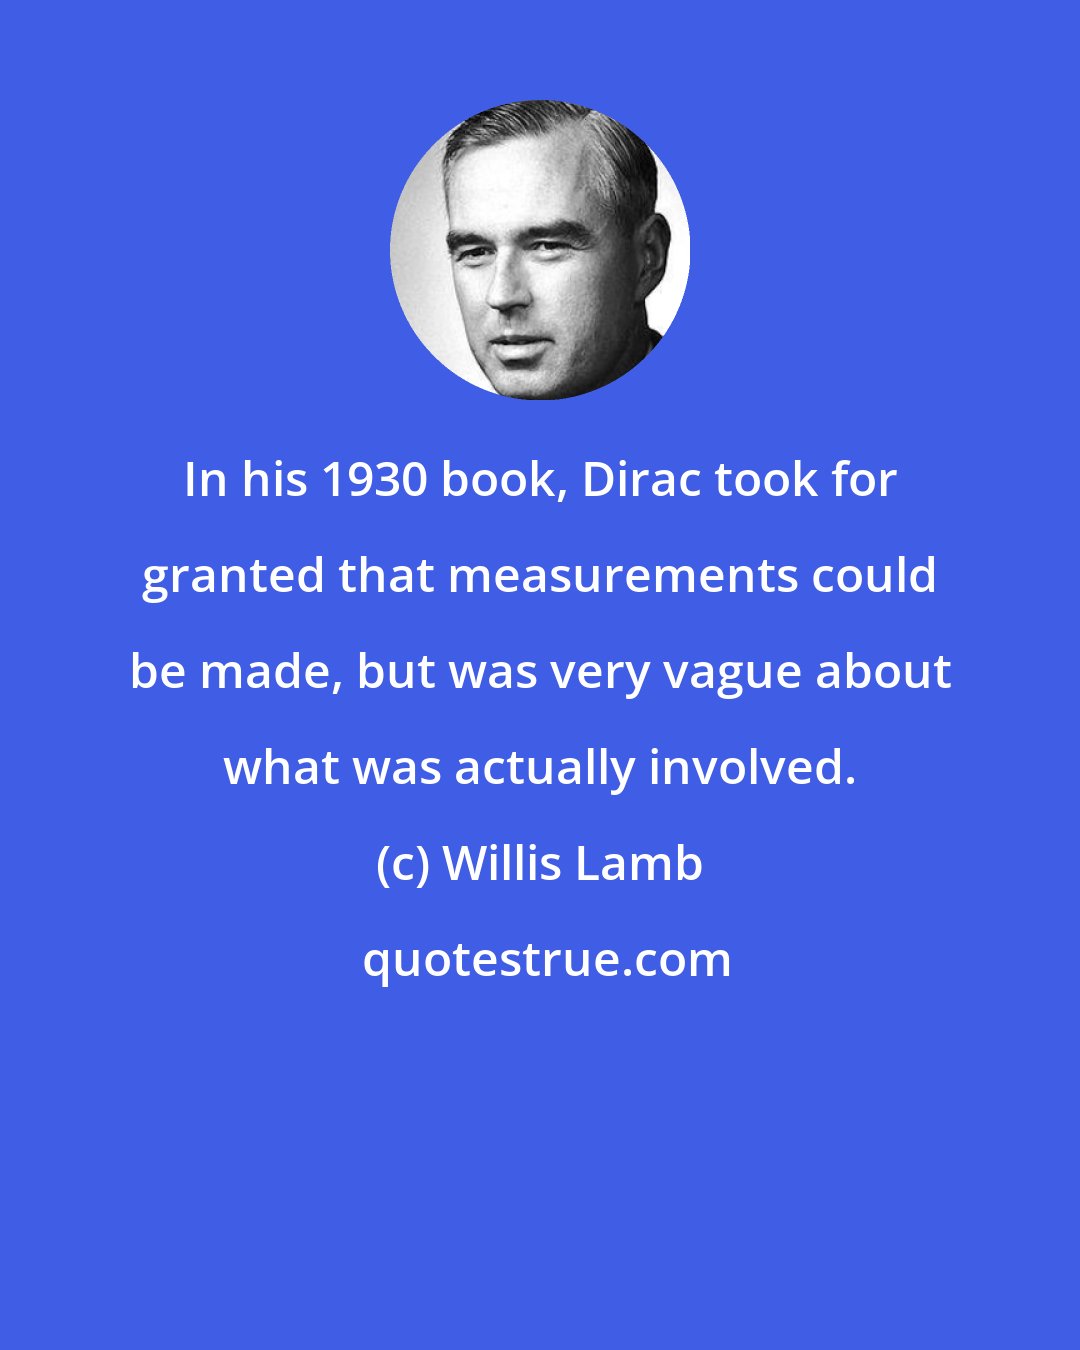 Willis Lamb: In his 1930 book, Dirac took for granted that measurements could be made, but was very vague about what was actually involved.